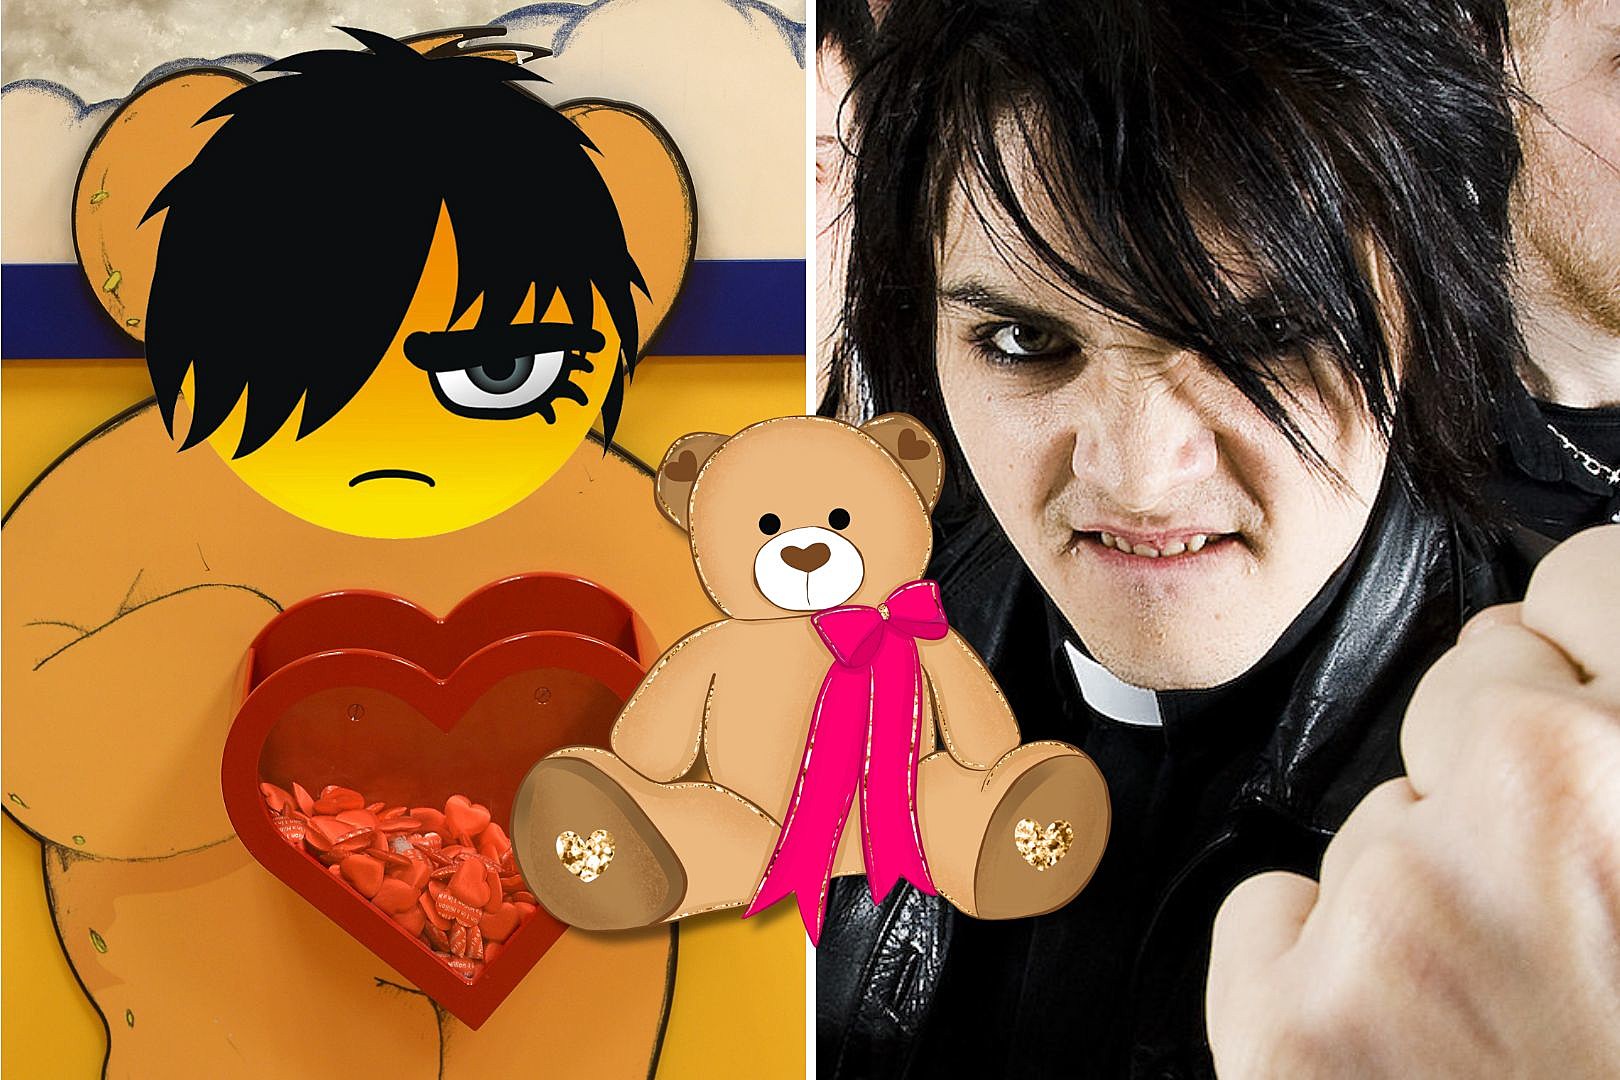 Even Build-A-Bear Knows Emo Is Making a Comeback